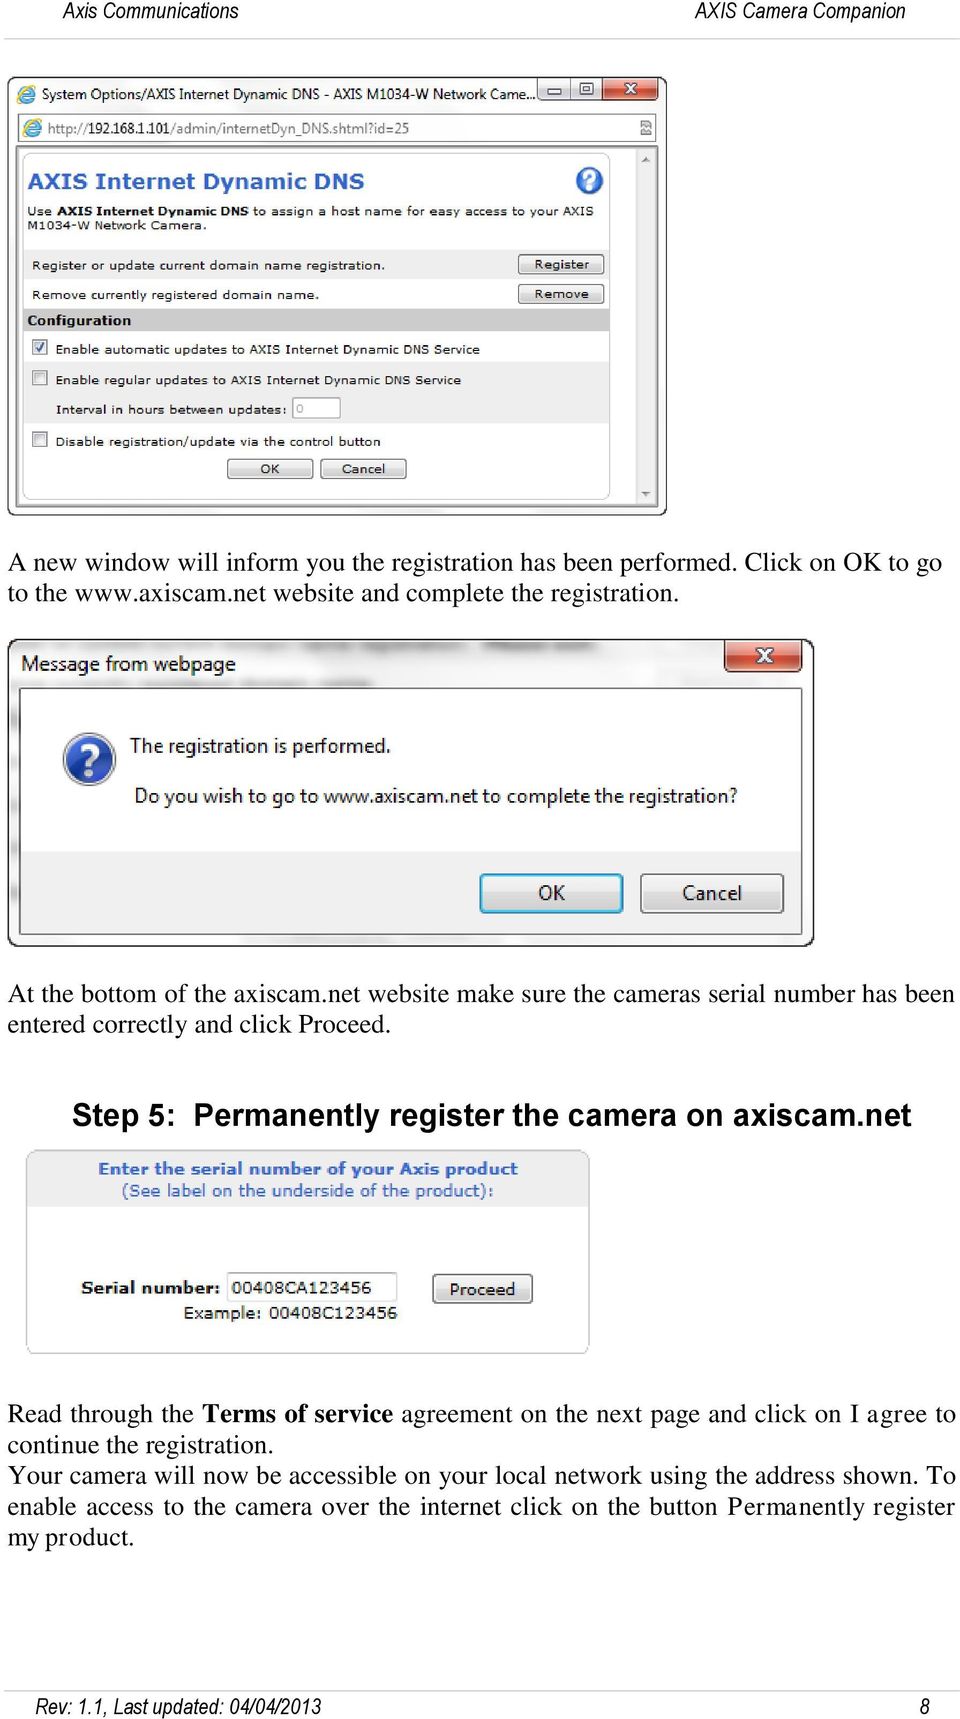 Step 5: Permanently register the camera on axiscam.